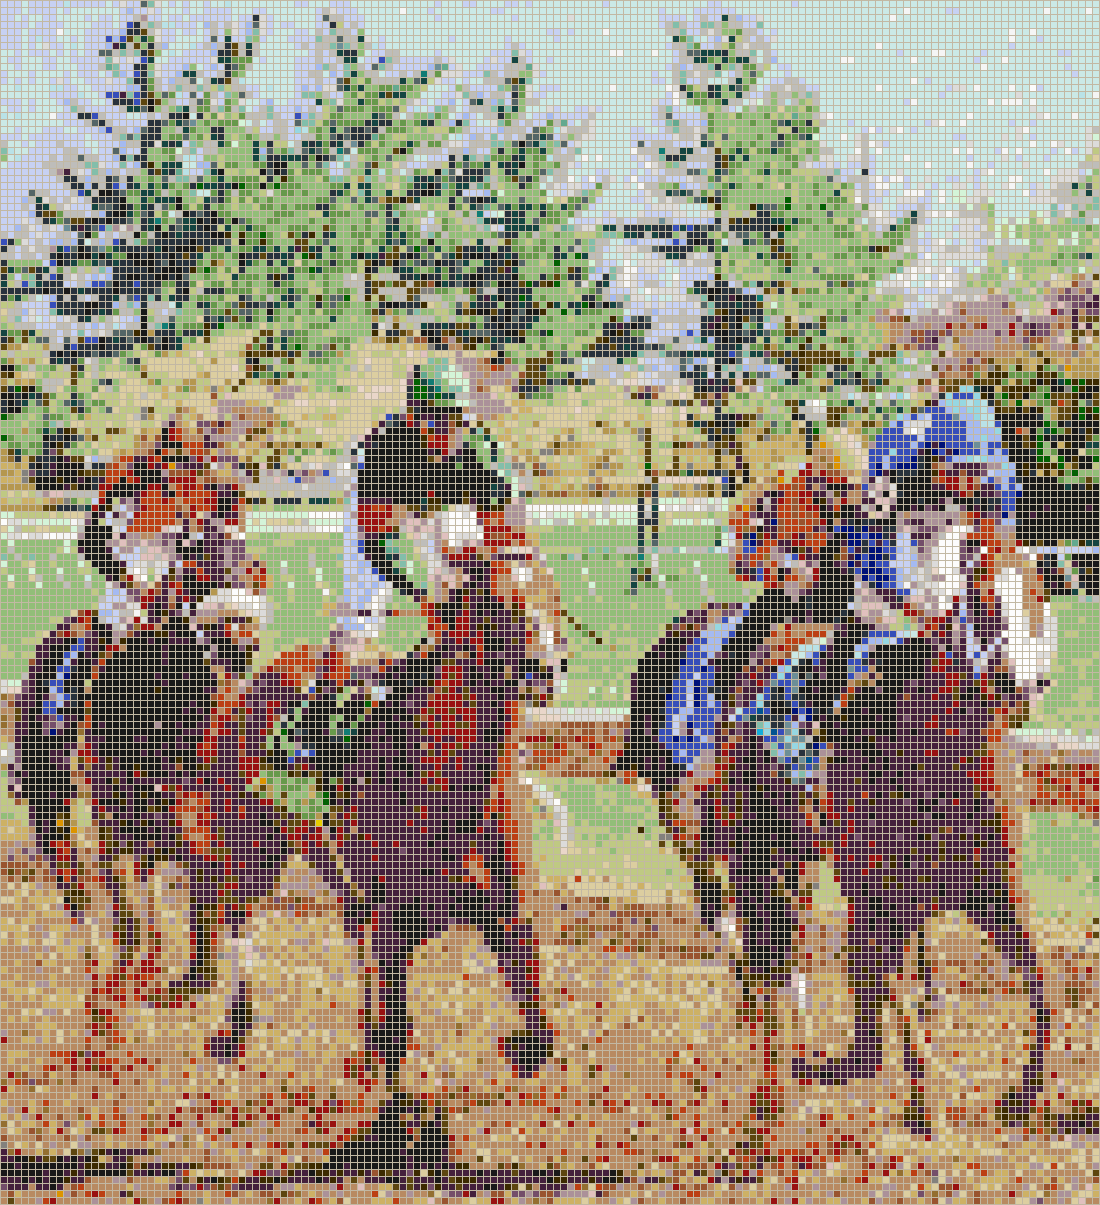 Horse Racing (Keeneland Race Track) - Mosaic Tile Picture Art